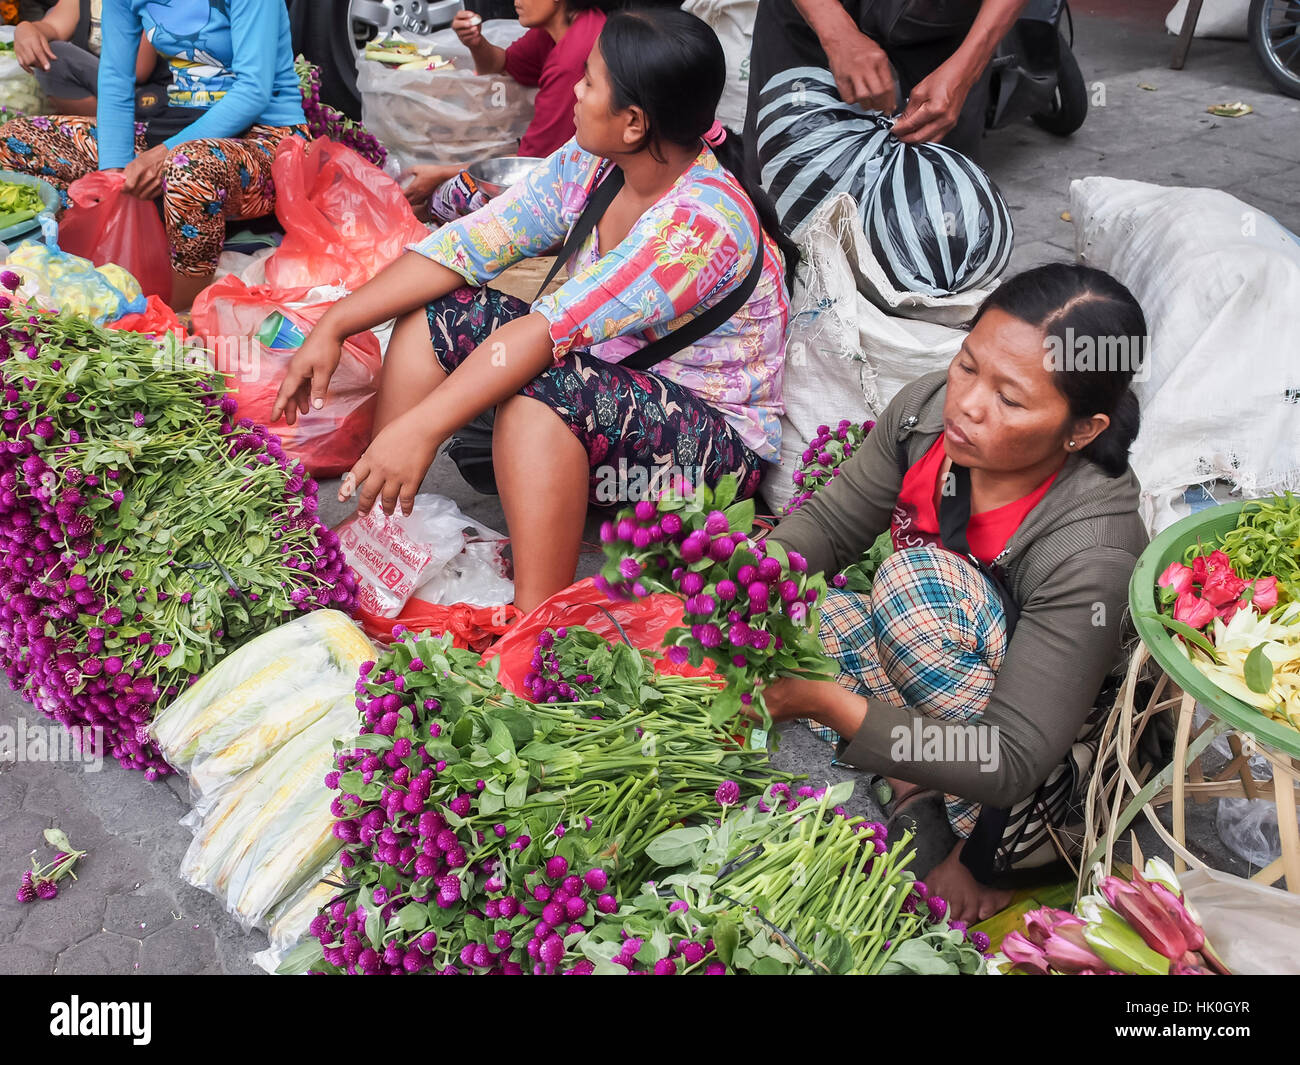 Flower sellers at a market, Denpasar, Bali, Indonesia, Southeast Asia Stock Photo